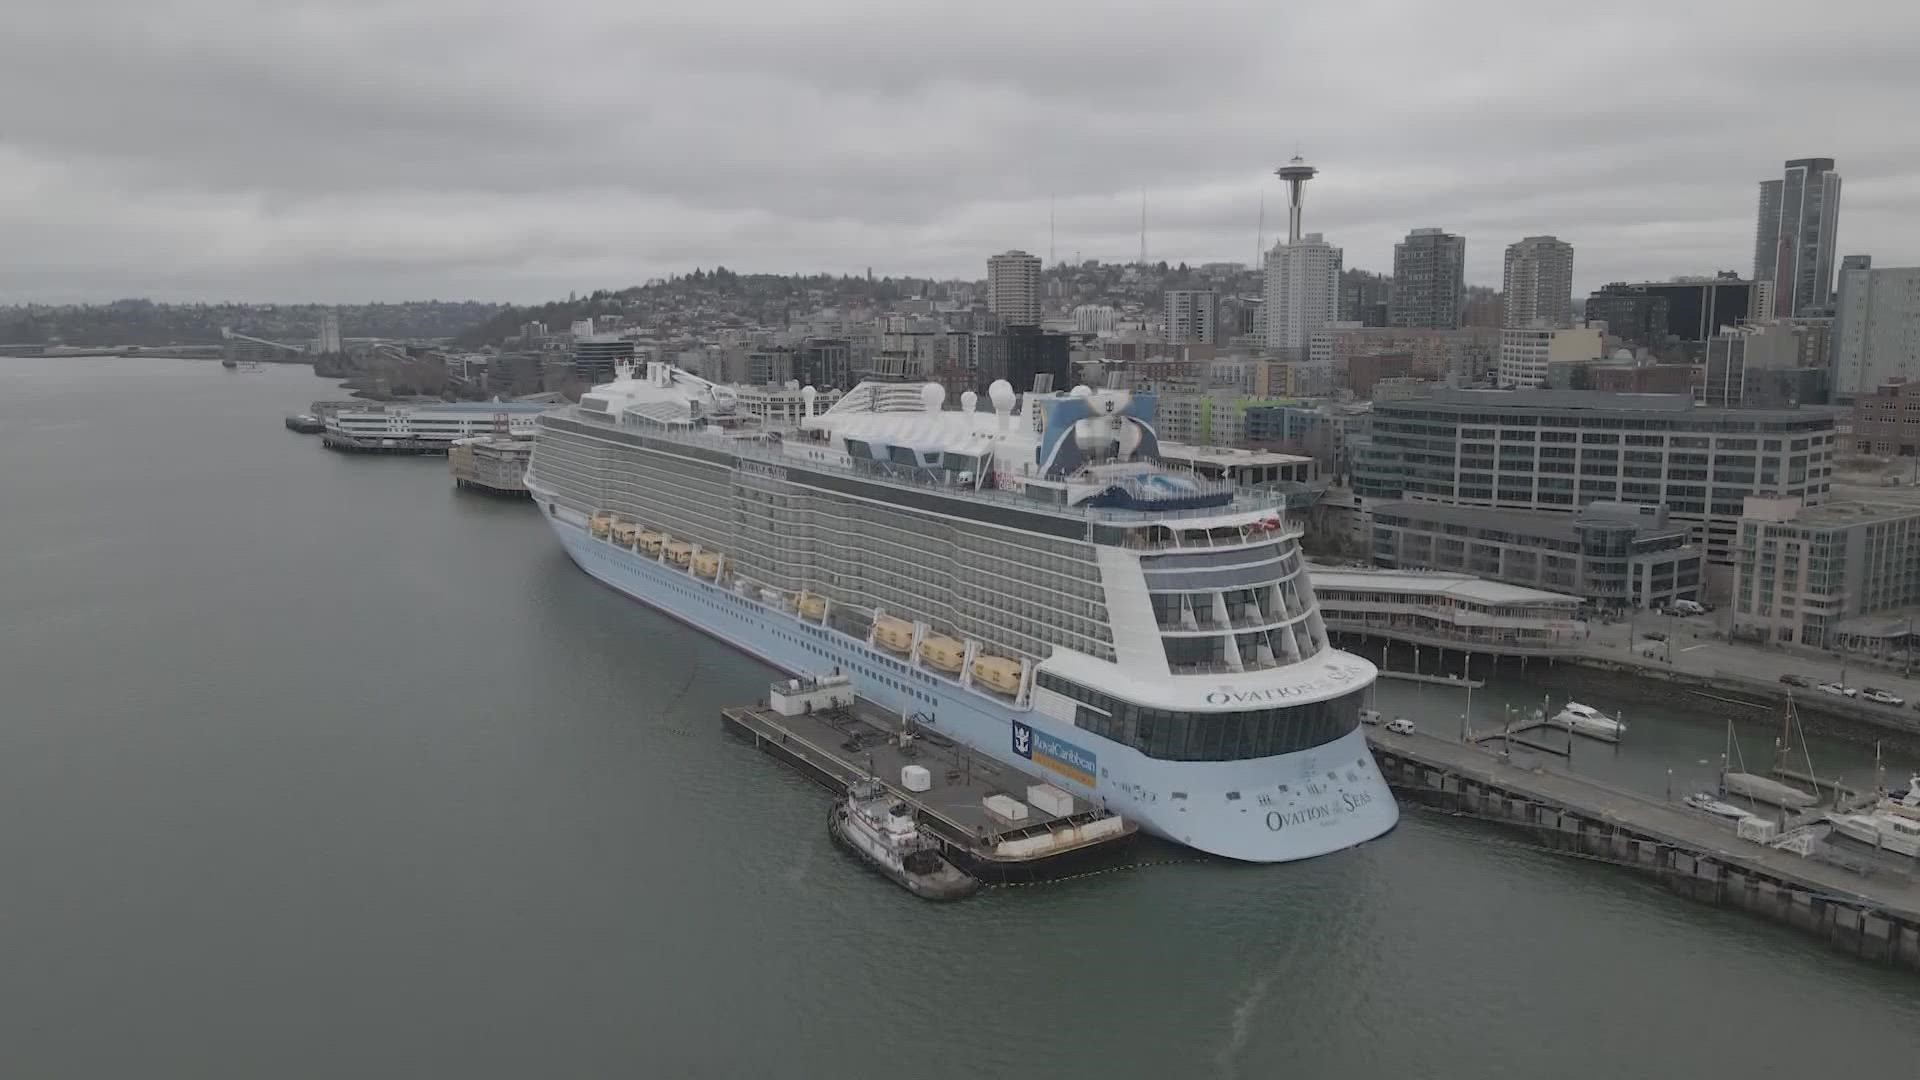 Canada announced Monday it will begin welcoming cruise ships back to its waters beginning in April.